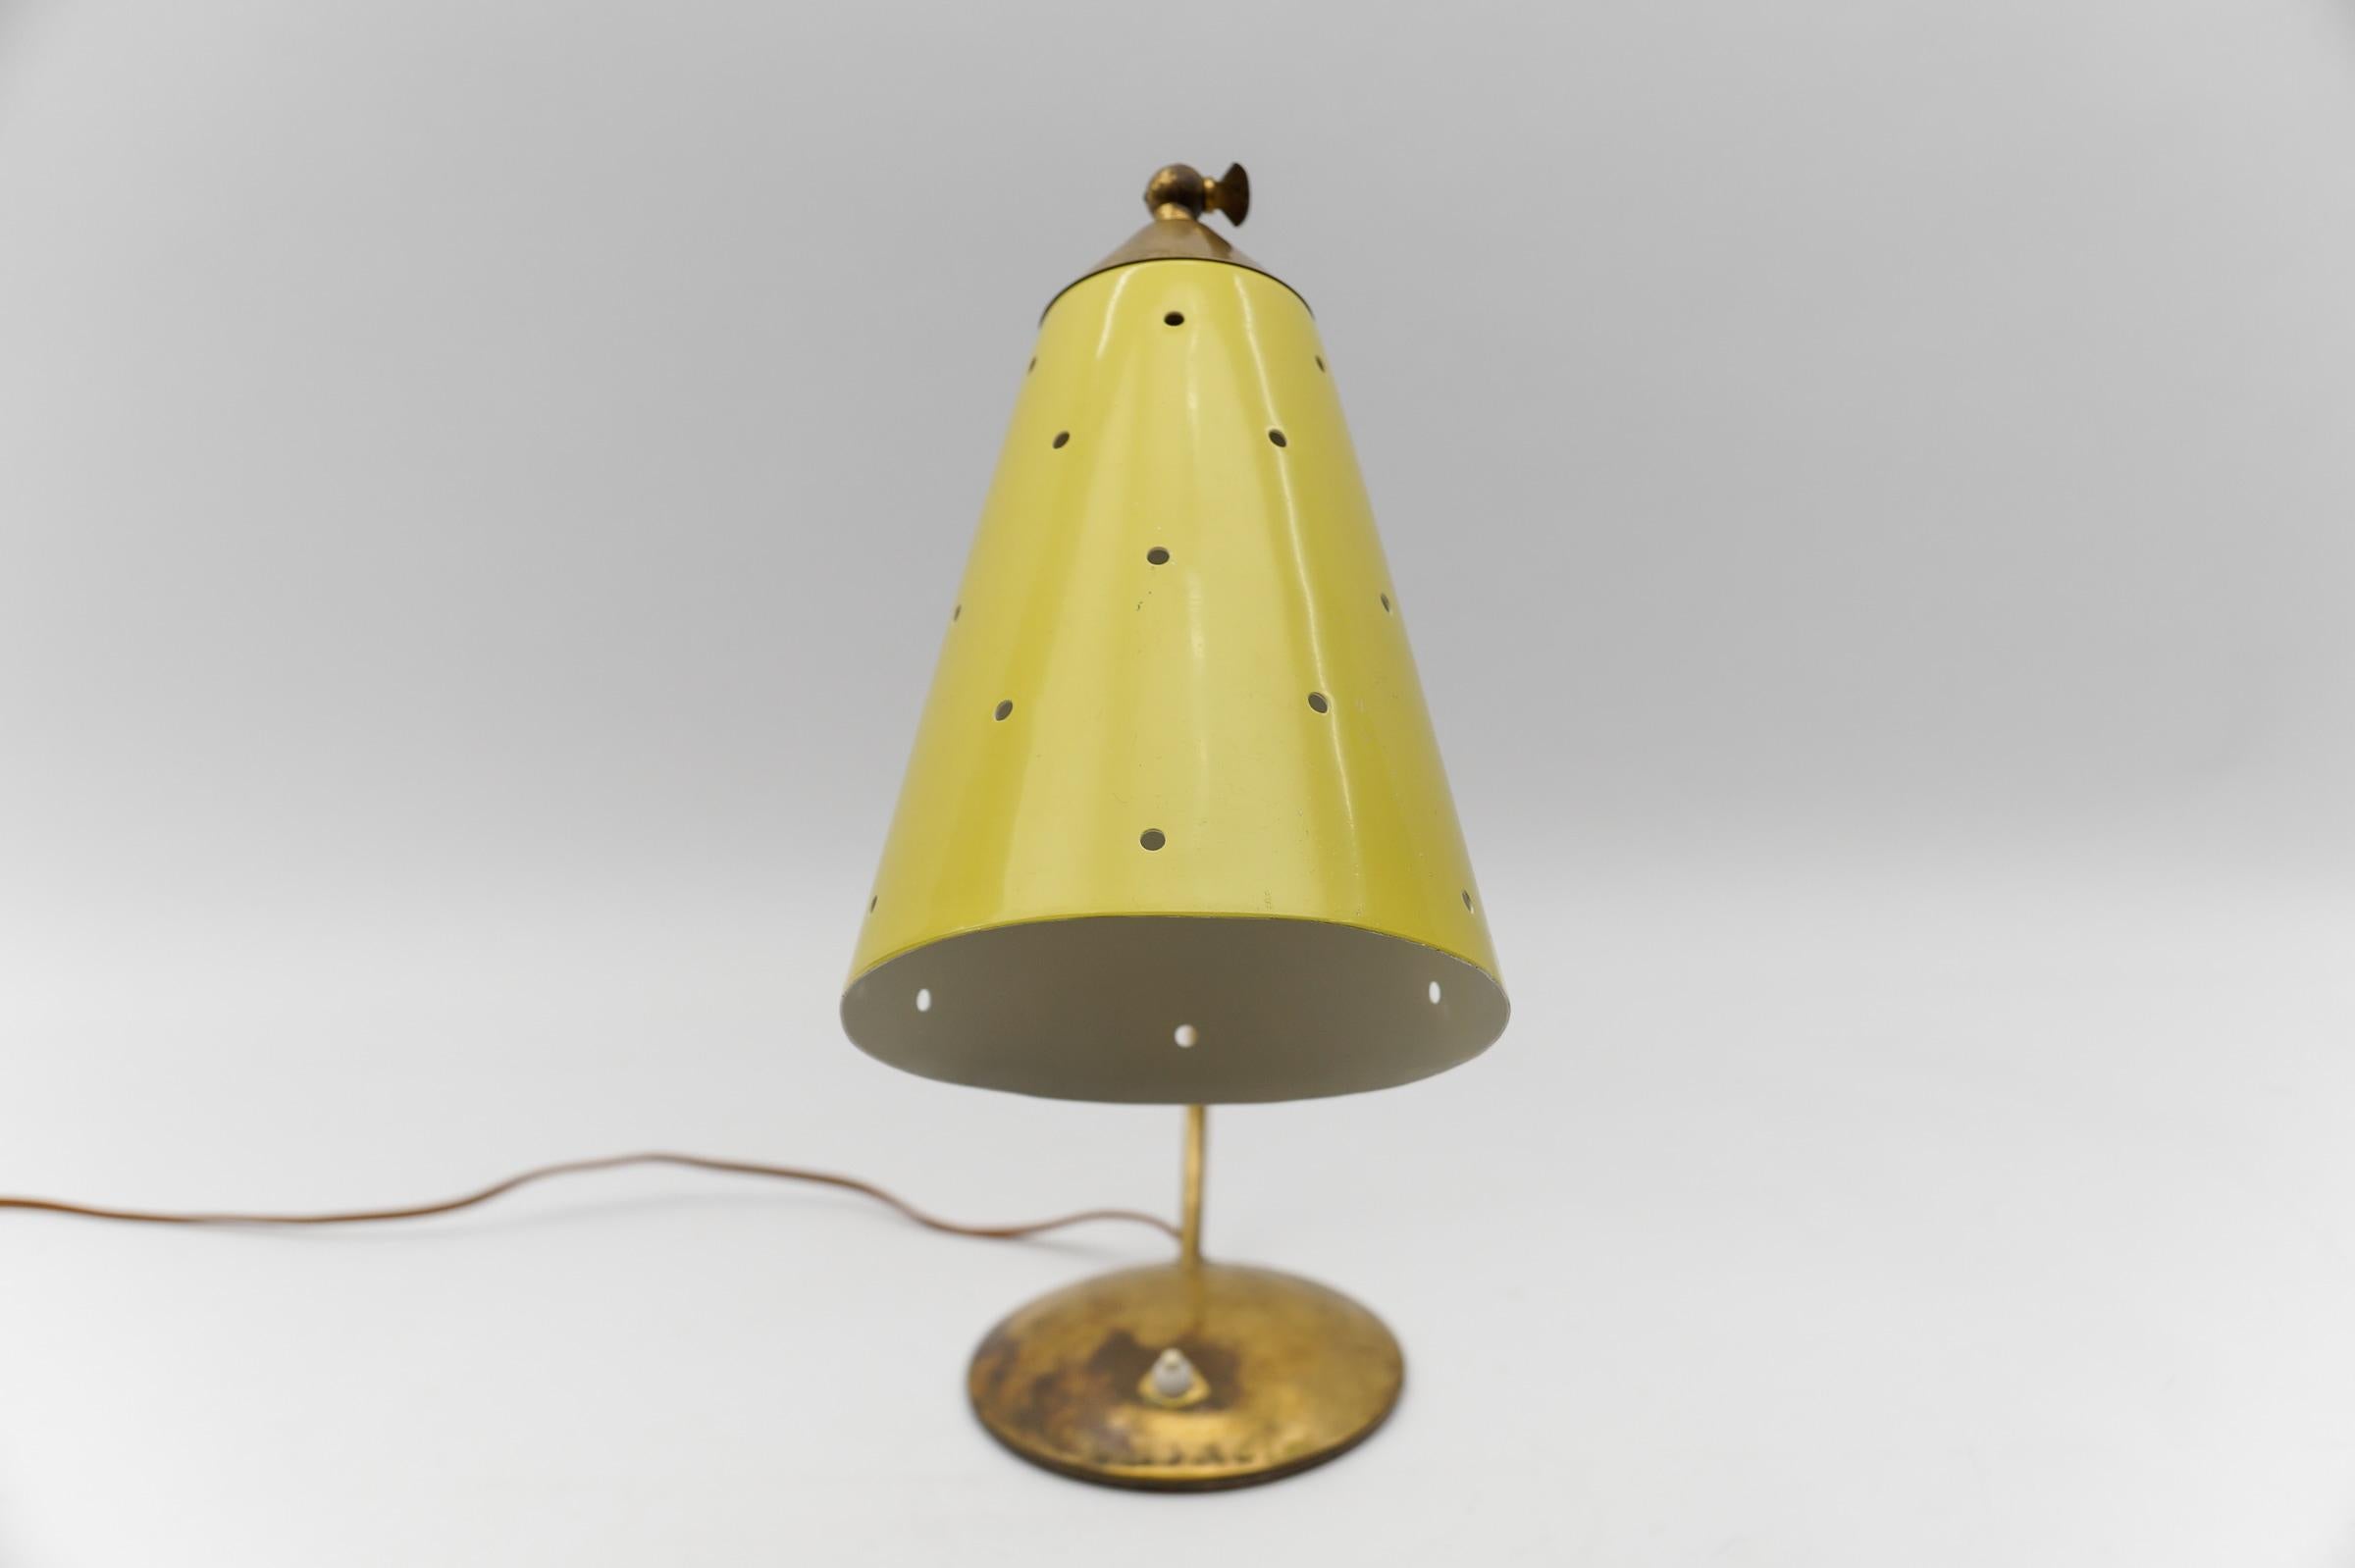 Beautiful Mid-Century Modern Table Lamp in Brass, 1950s Germany For Sale 2